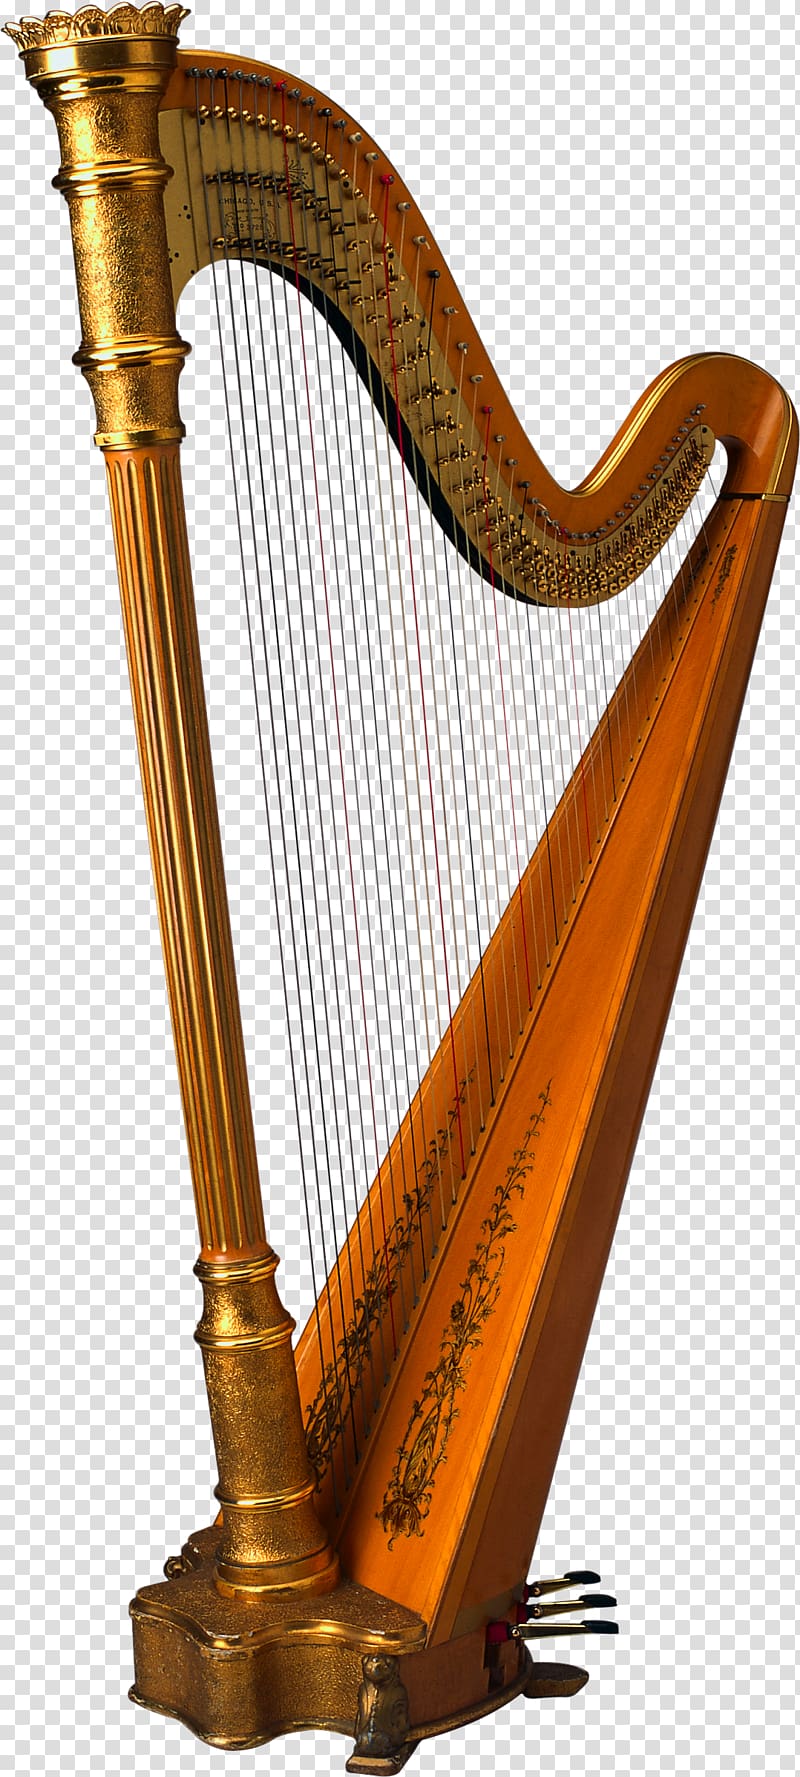 Musical instrument String instrument Harp Piano, Harp transparent background PNG clipart